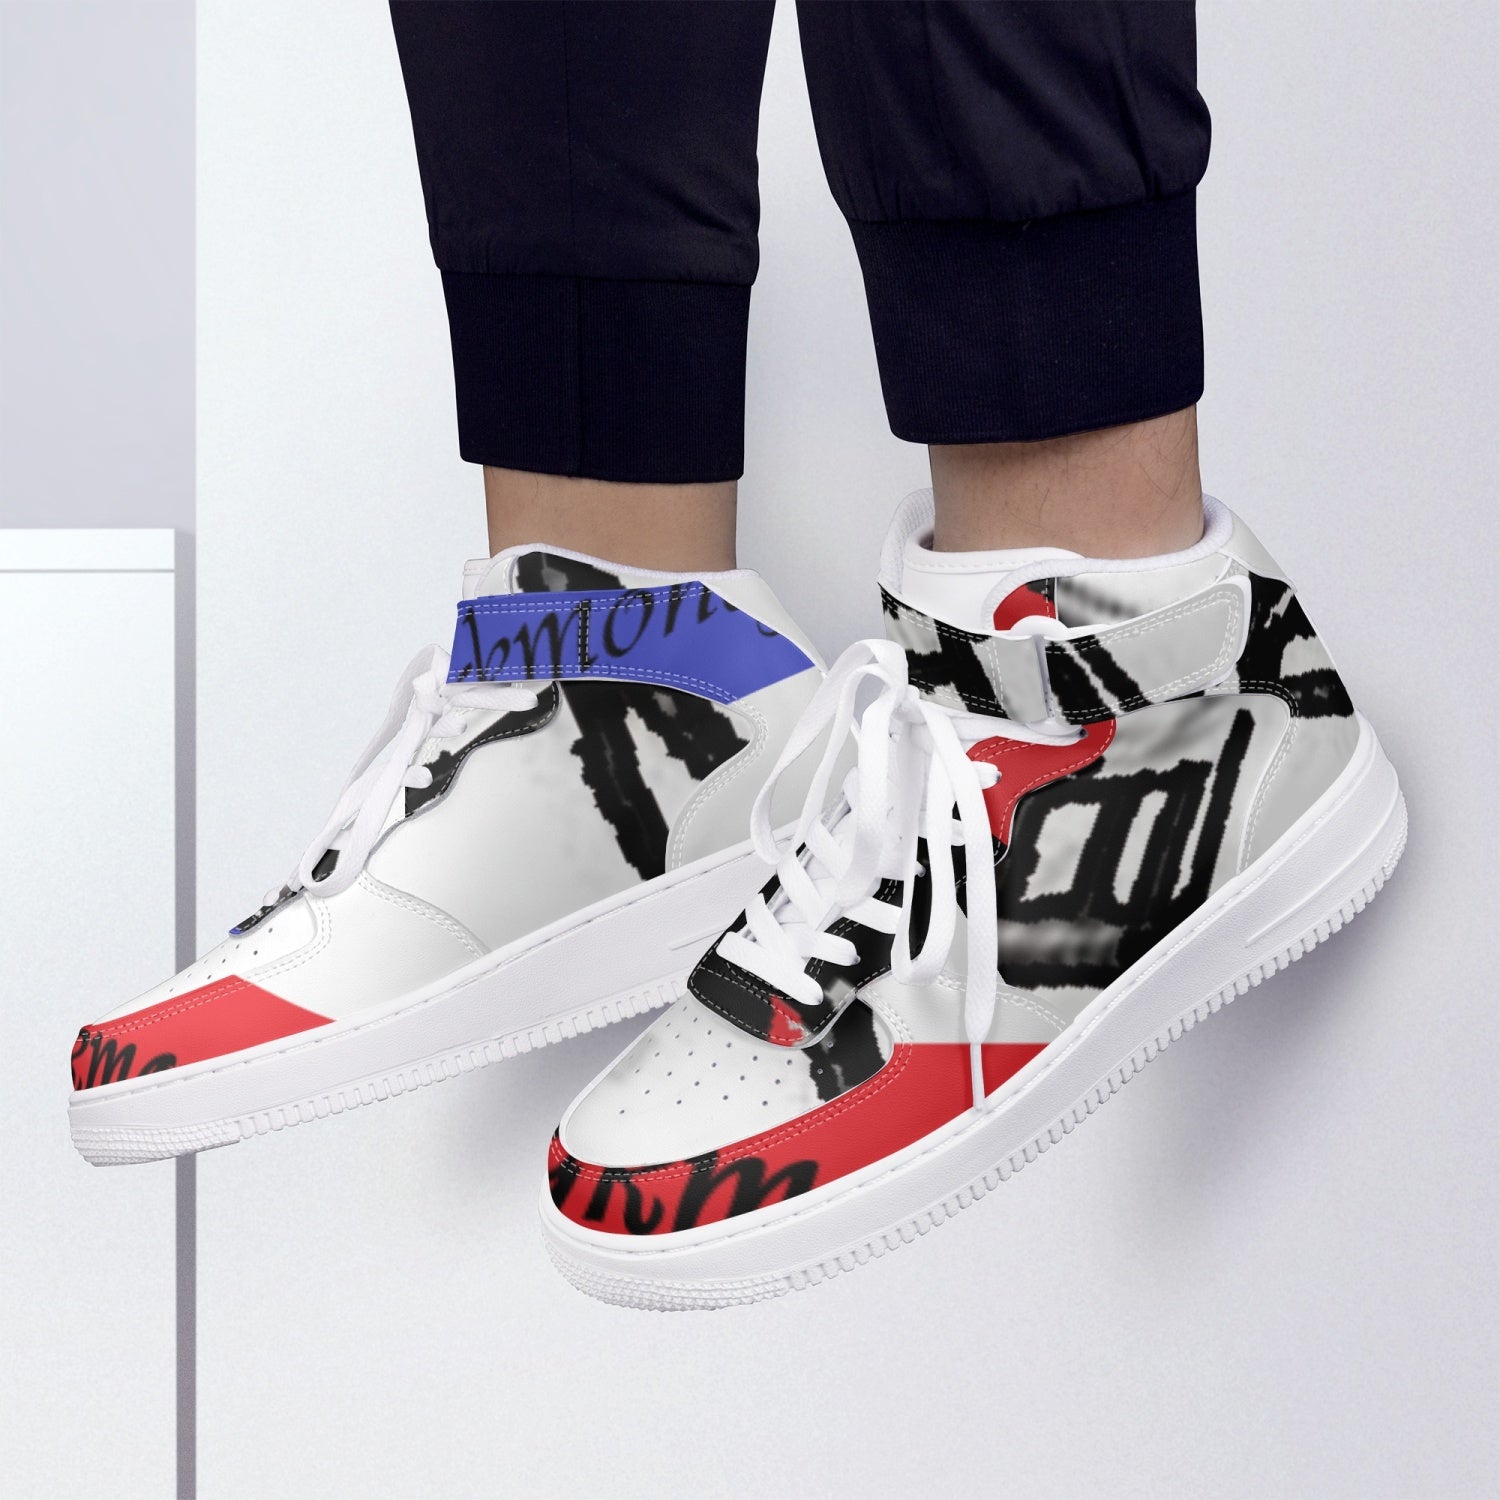 284. New High-Top Leather Sports Sneakers